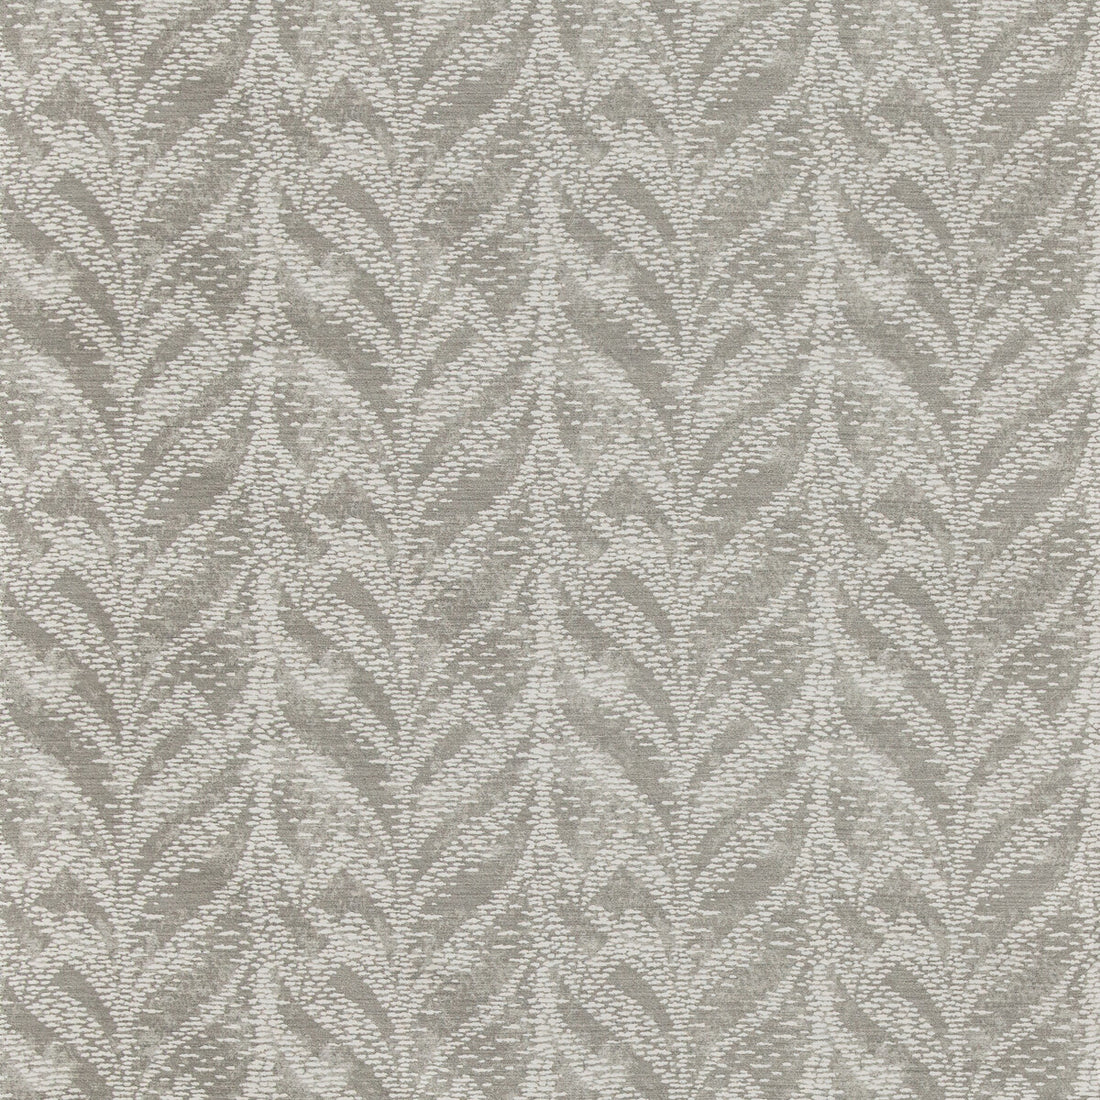 Pompano fabric in stone color - pattern 35818.11.0 - by Kravet Design in the Indoor / Outdoor collection